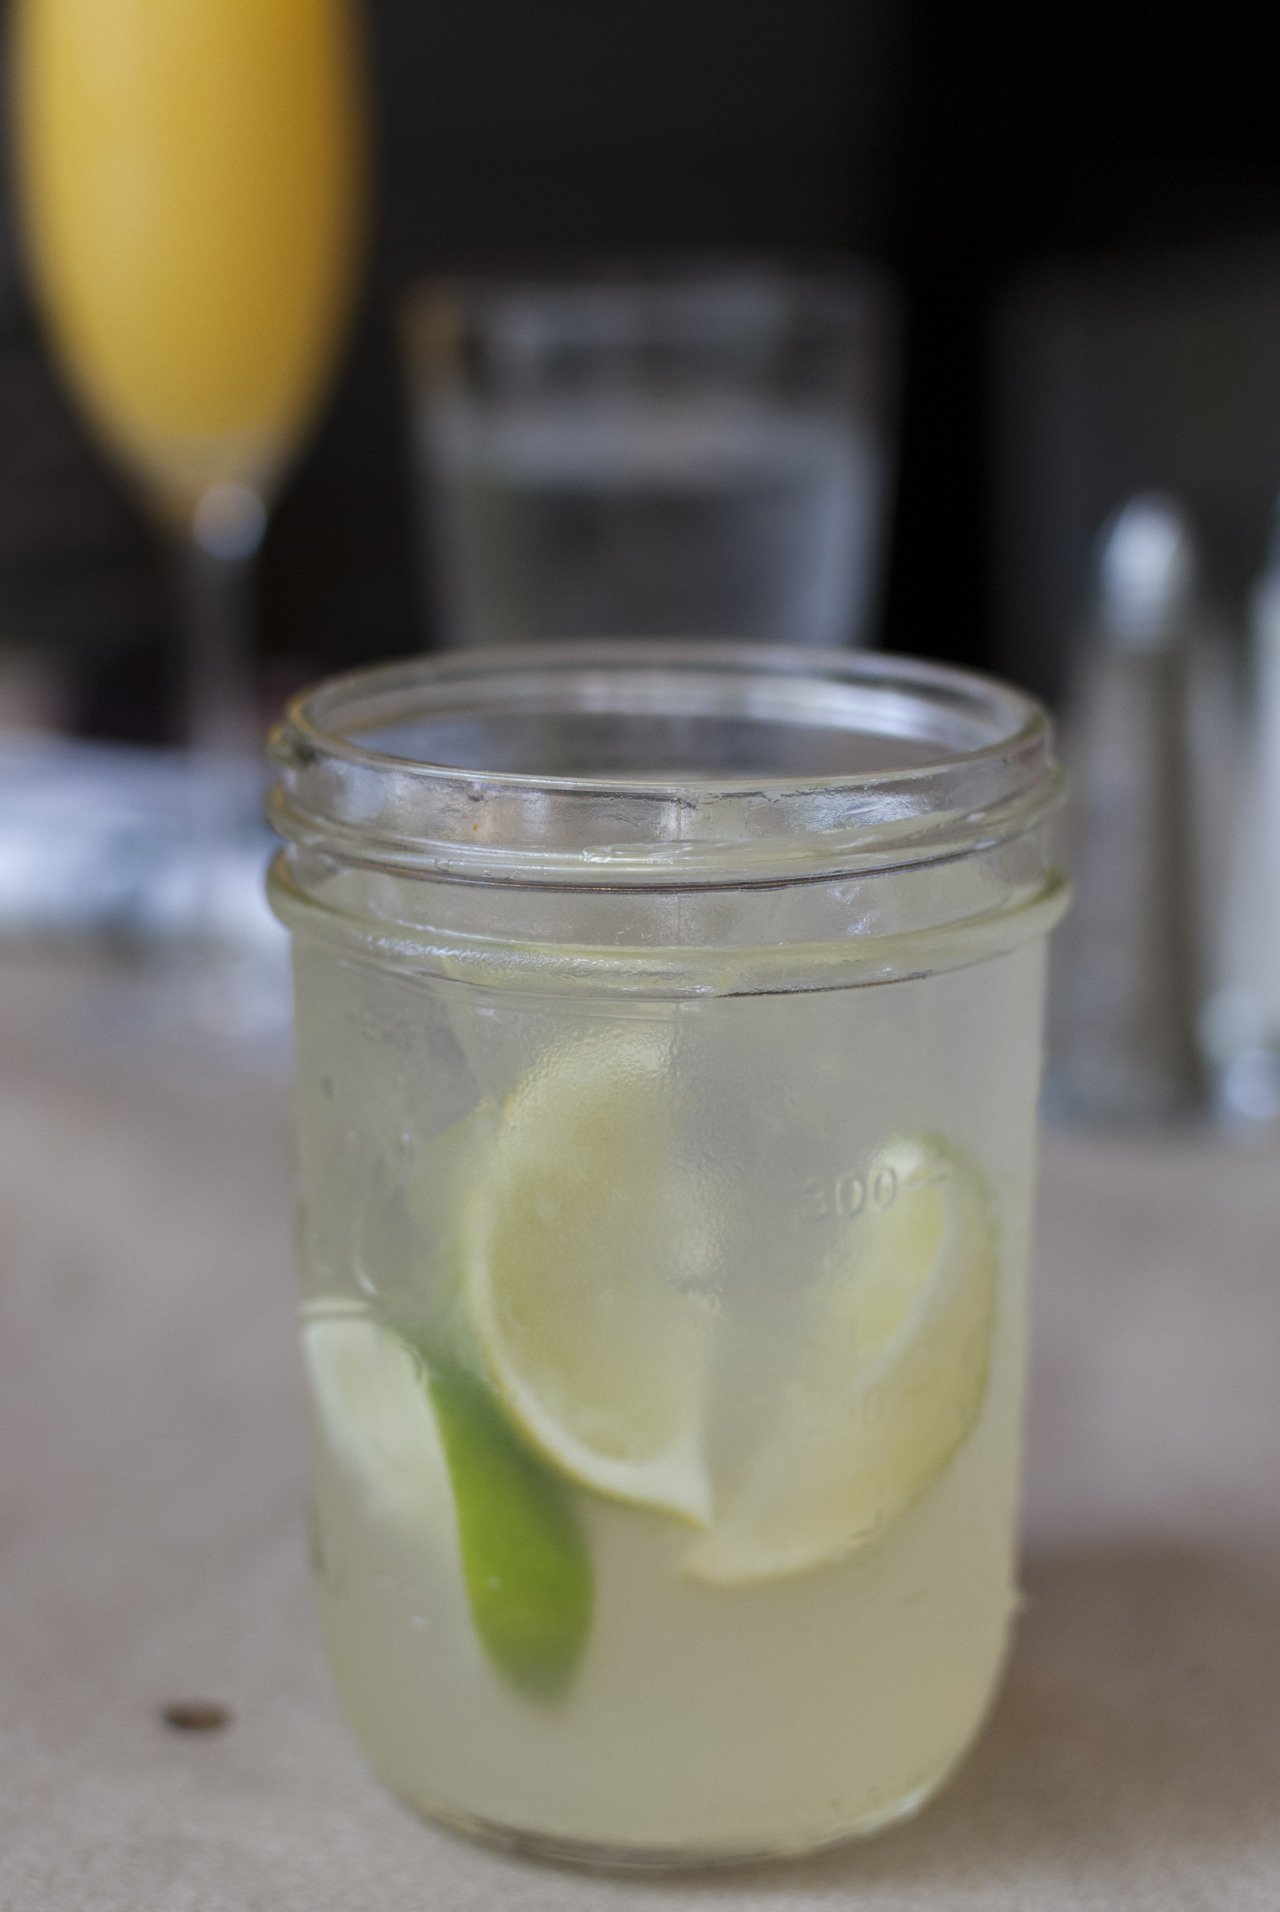 The Pickens Mule: Firefly moonshine with ginger beer and lime juice.
————
Nose Dive // Greenville, SC // 7.26.2014